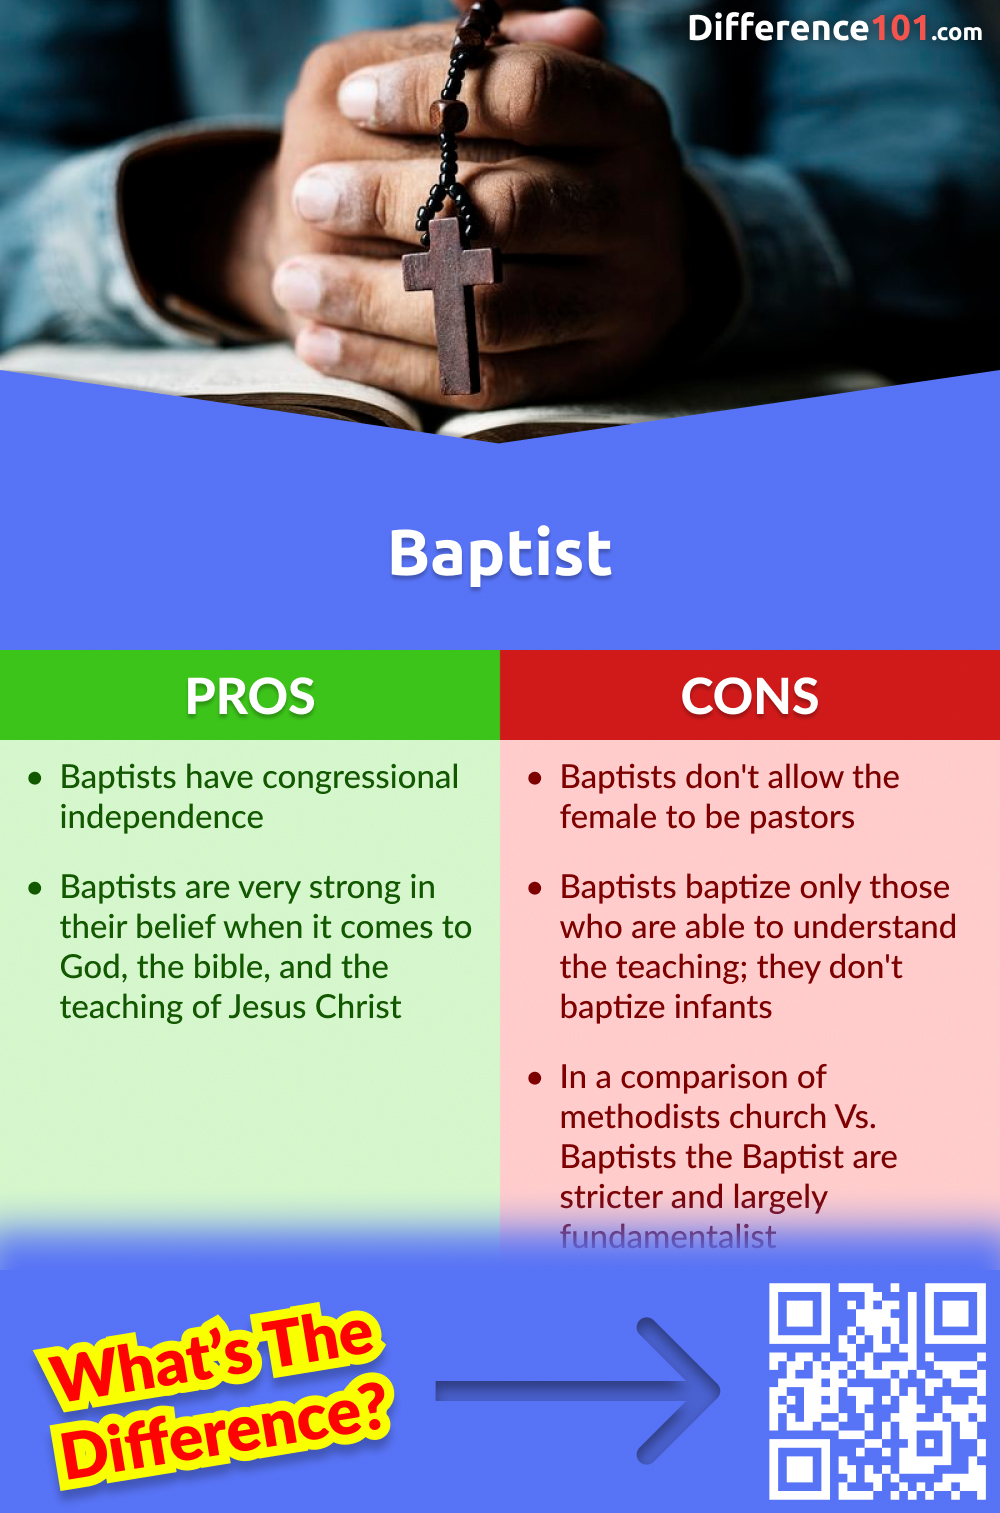 Pros and cons of Baptist